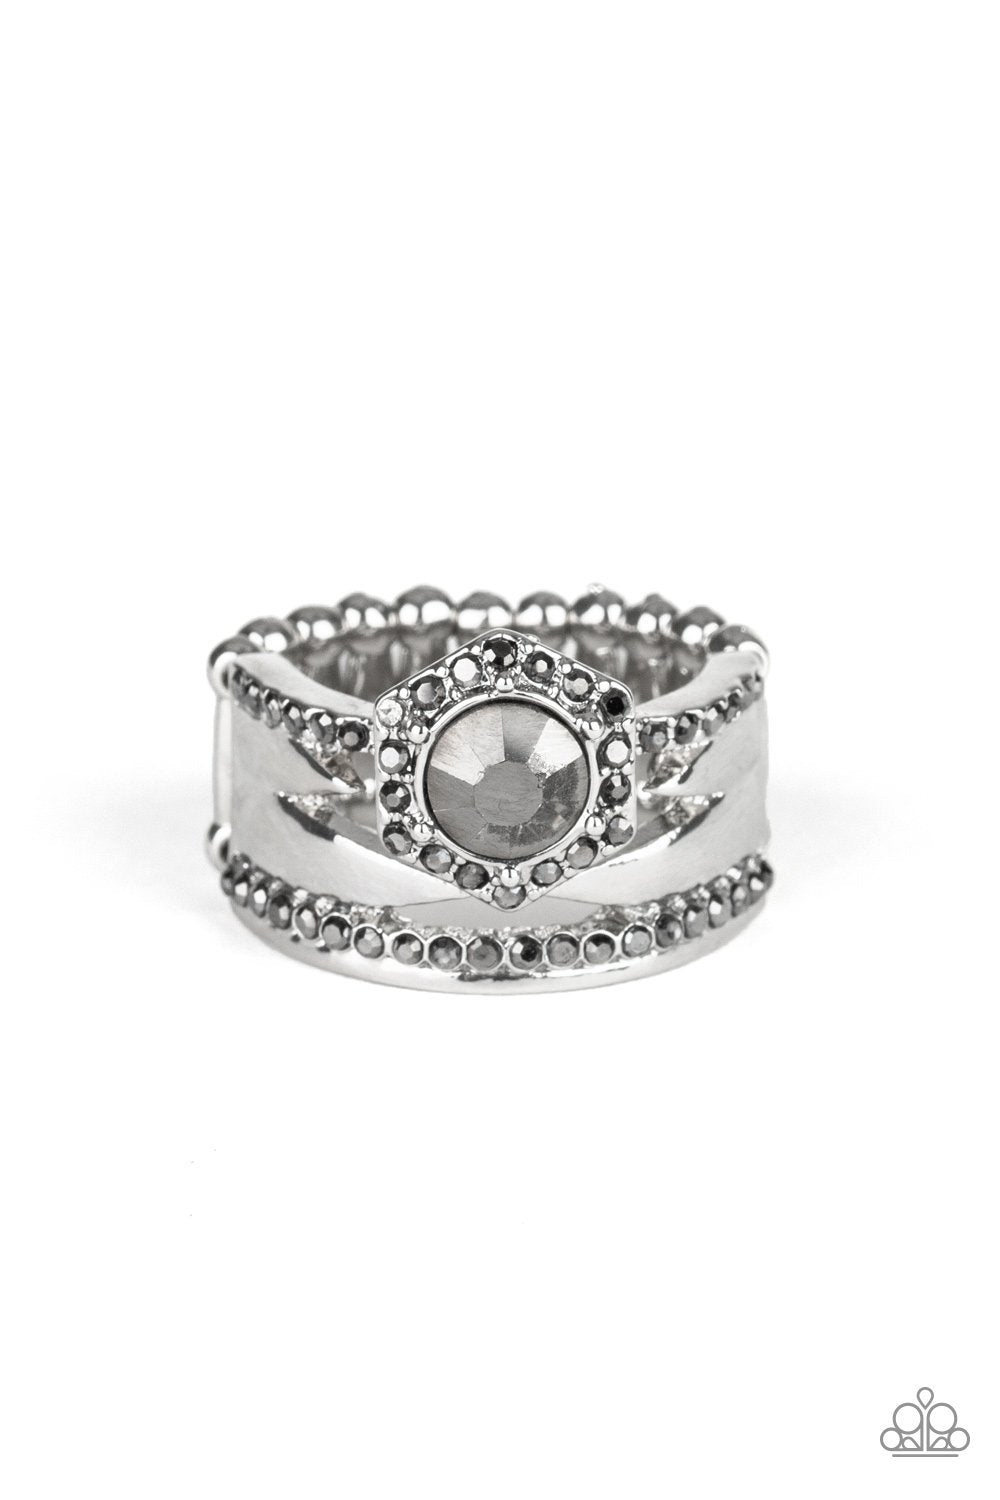 Modern Maven Silver Ring - Paparazzi Accessories- lightbox - CarasShop.com - $5 Jewelry by Cara Jewels